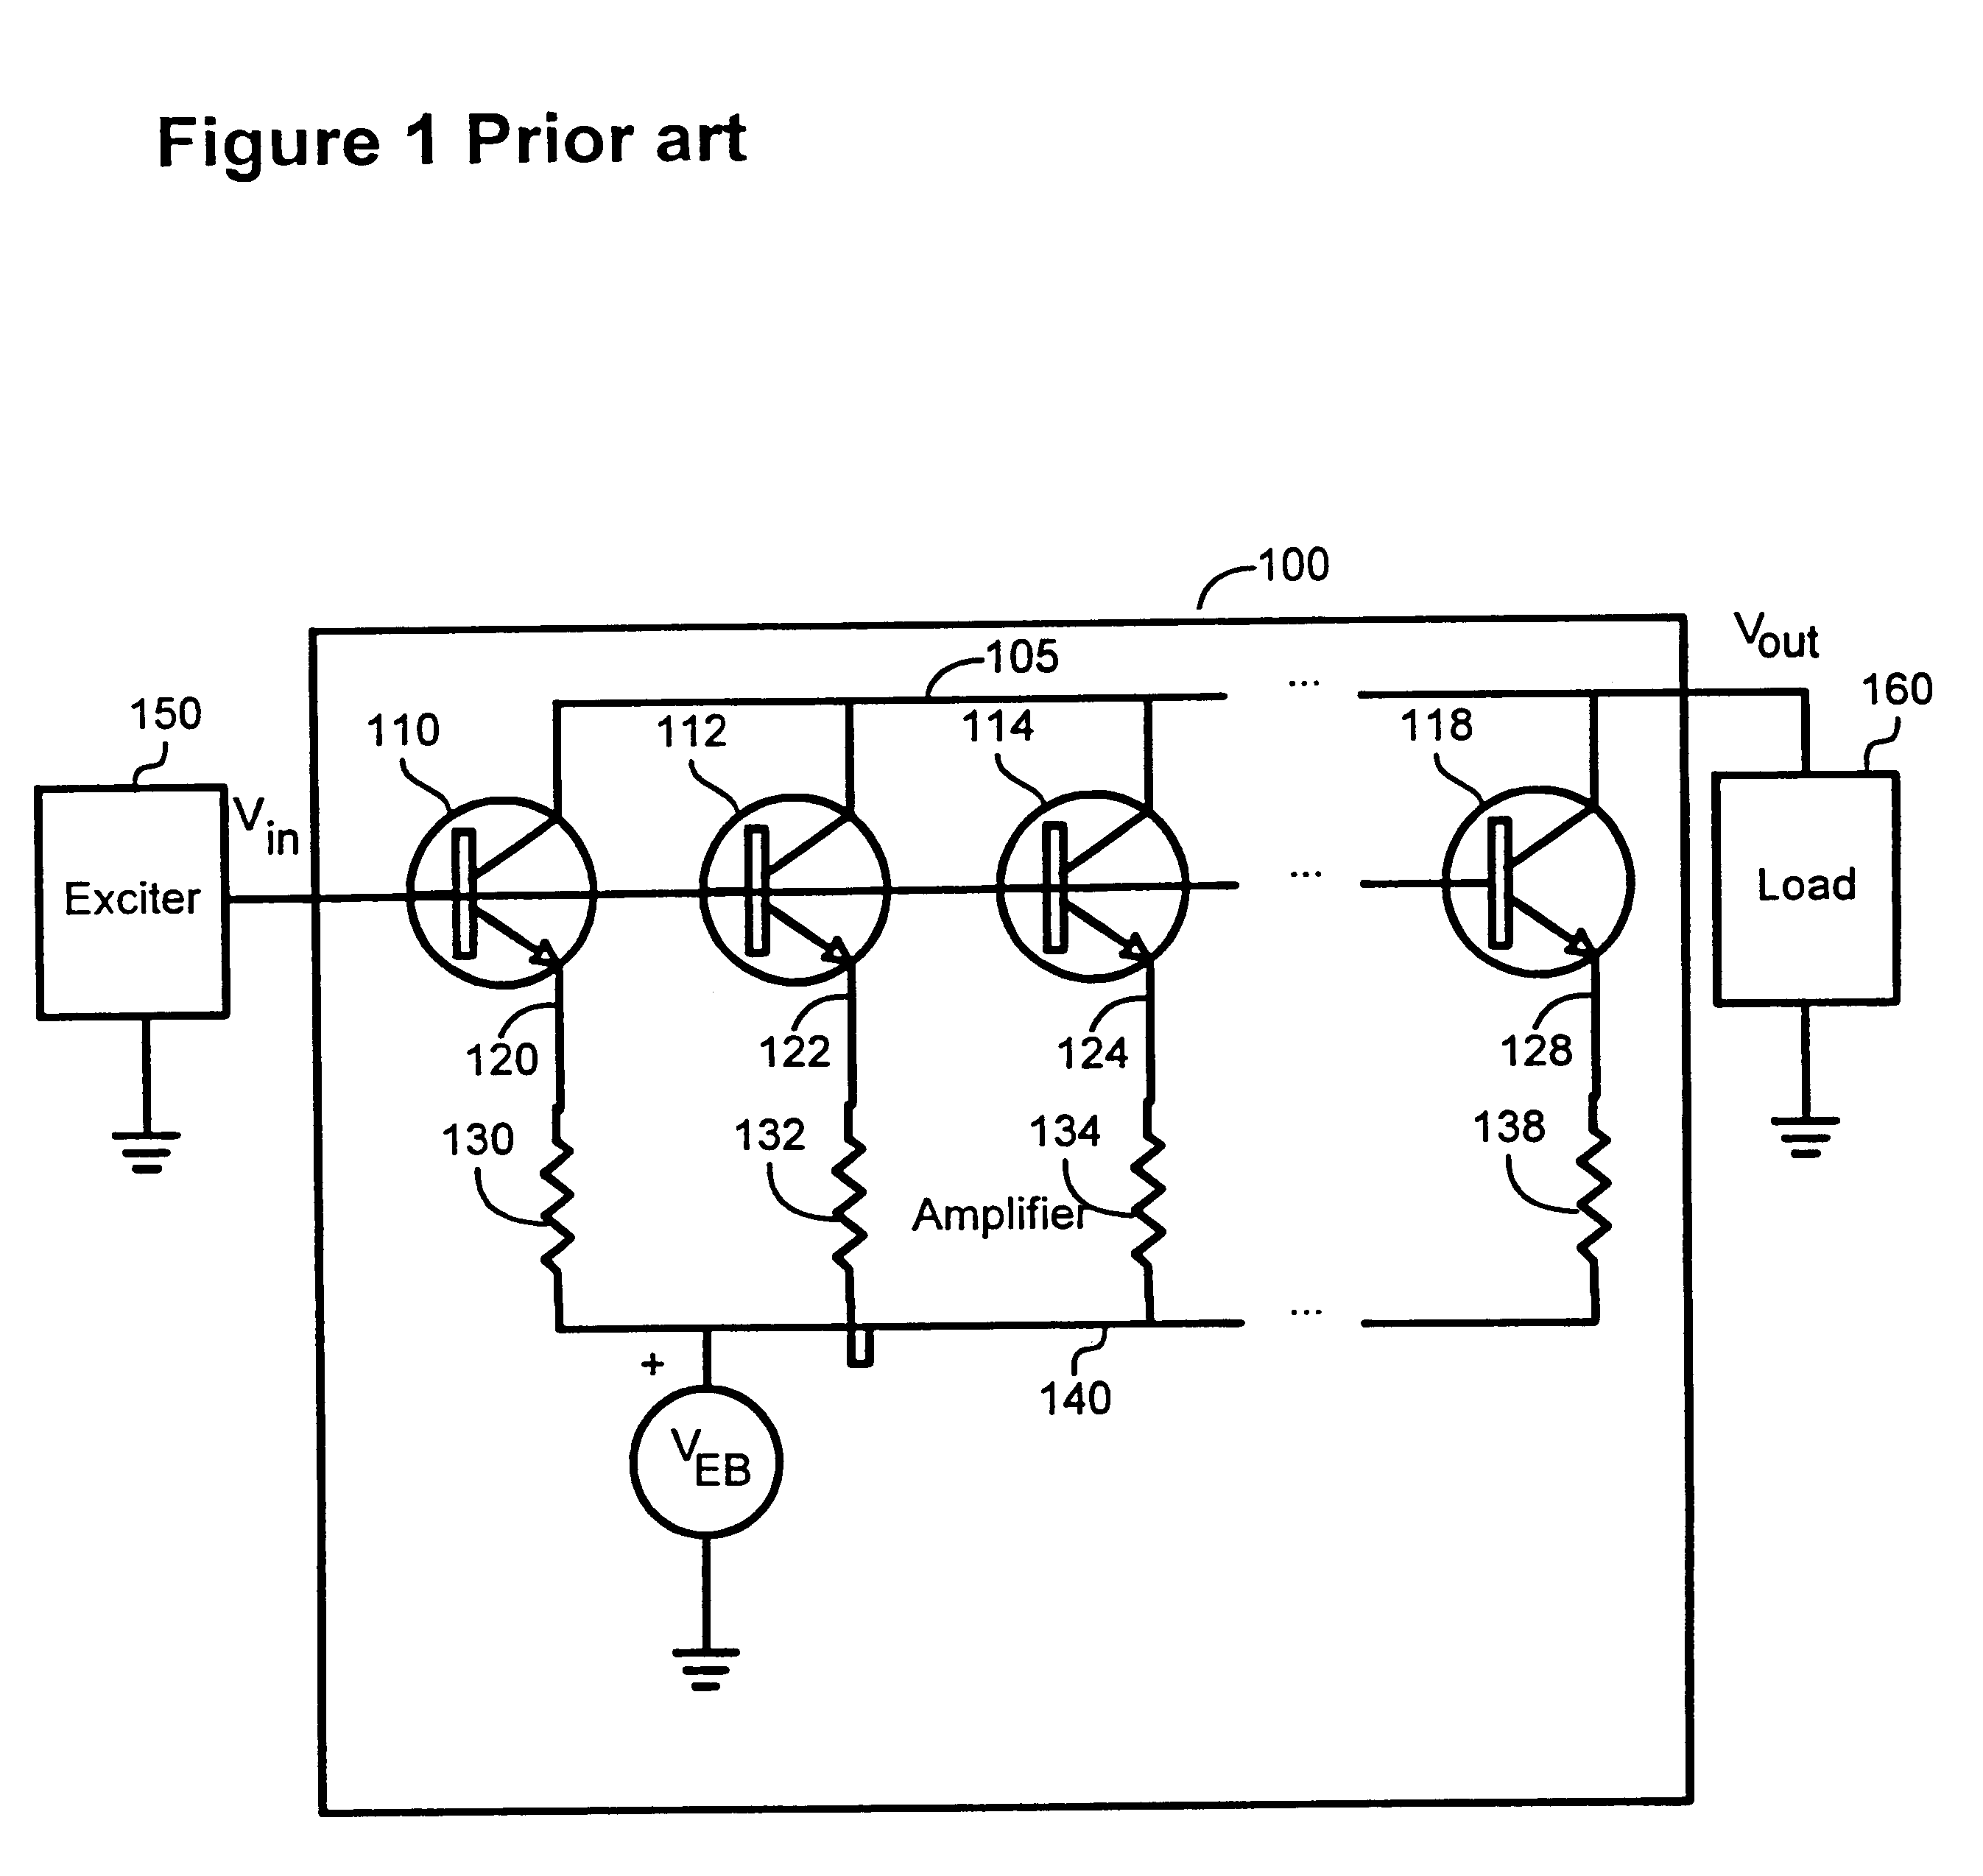 Protection scheme for multi-transistor amplifiers